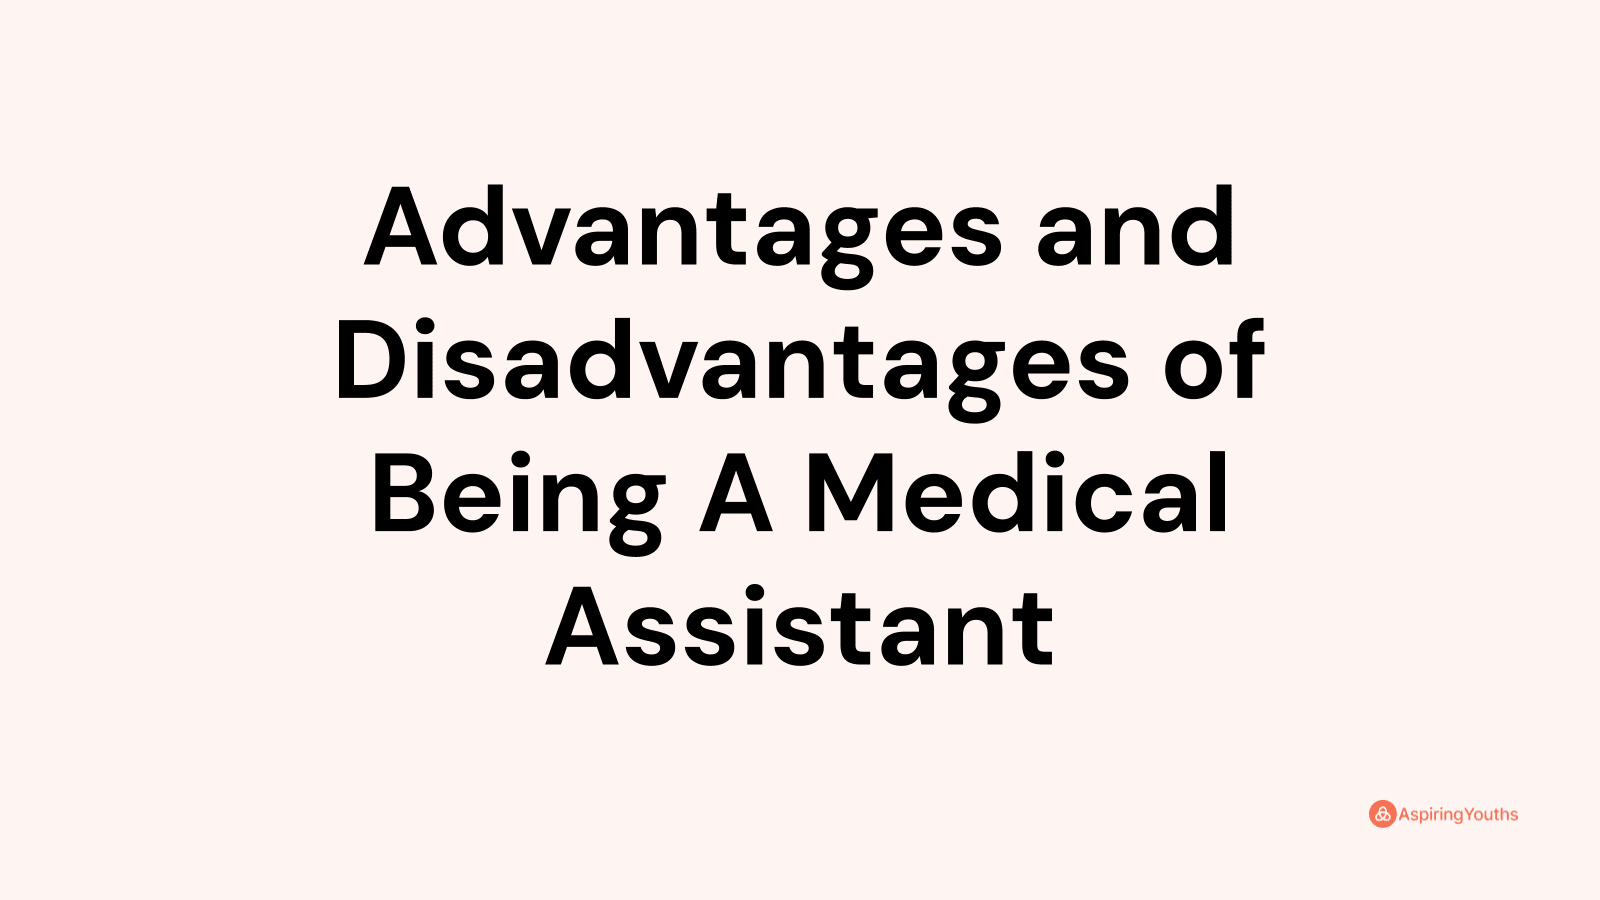 Advantages and disadvantages of Being A Medical Assistant